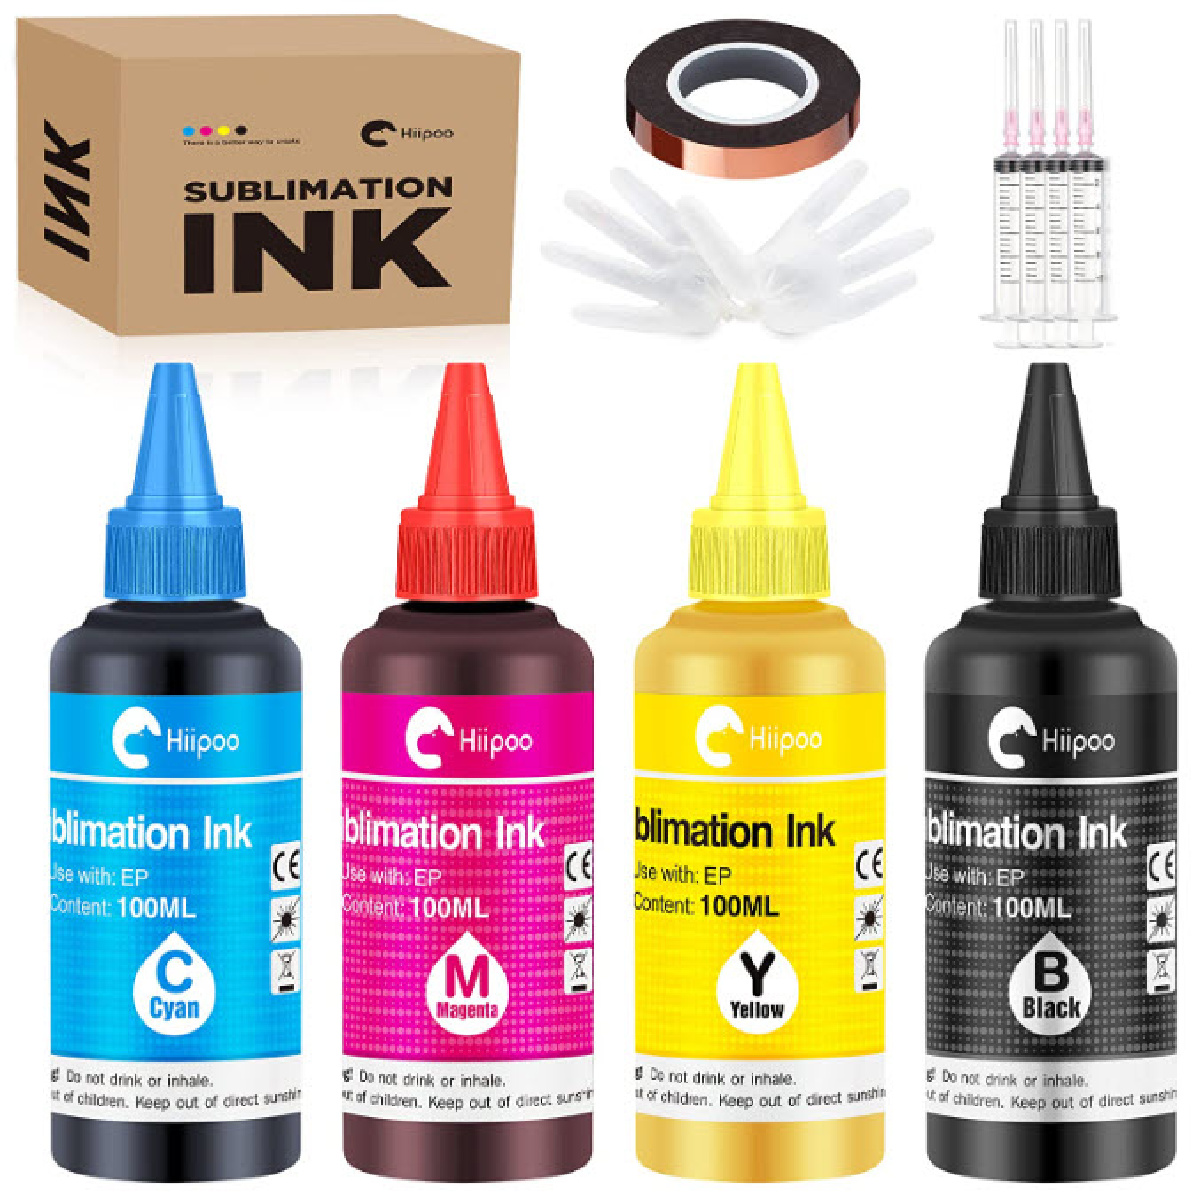 4 bottle of Hiipoo sublimation ink with syringe applilcation